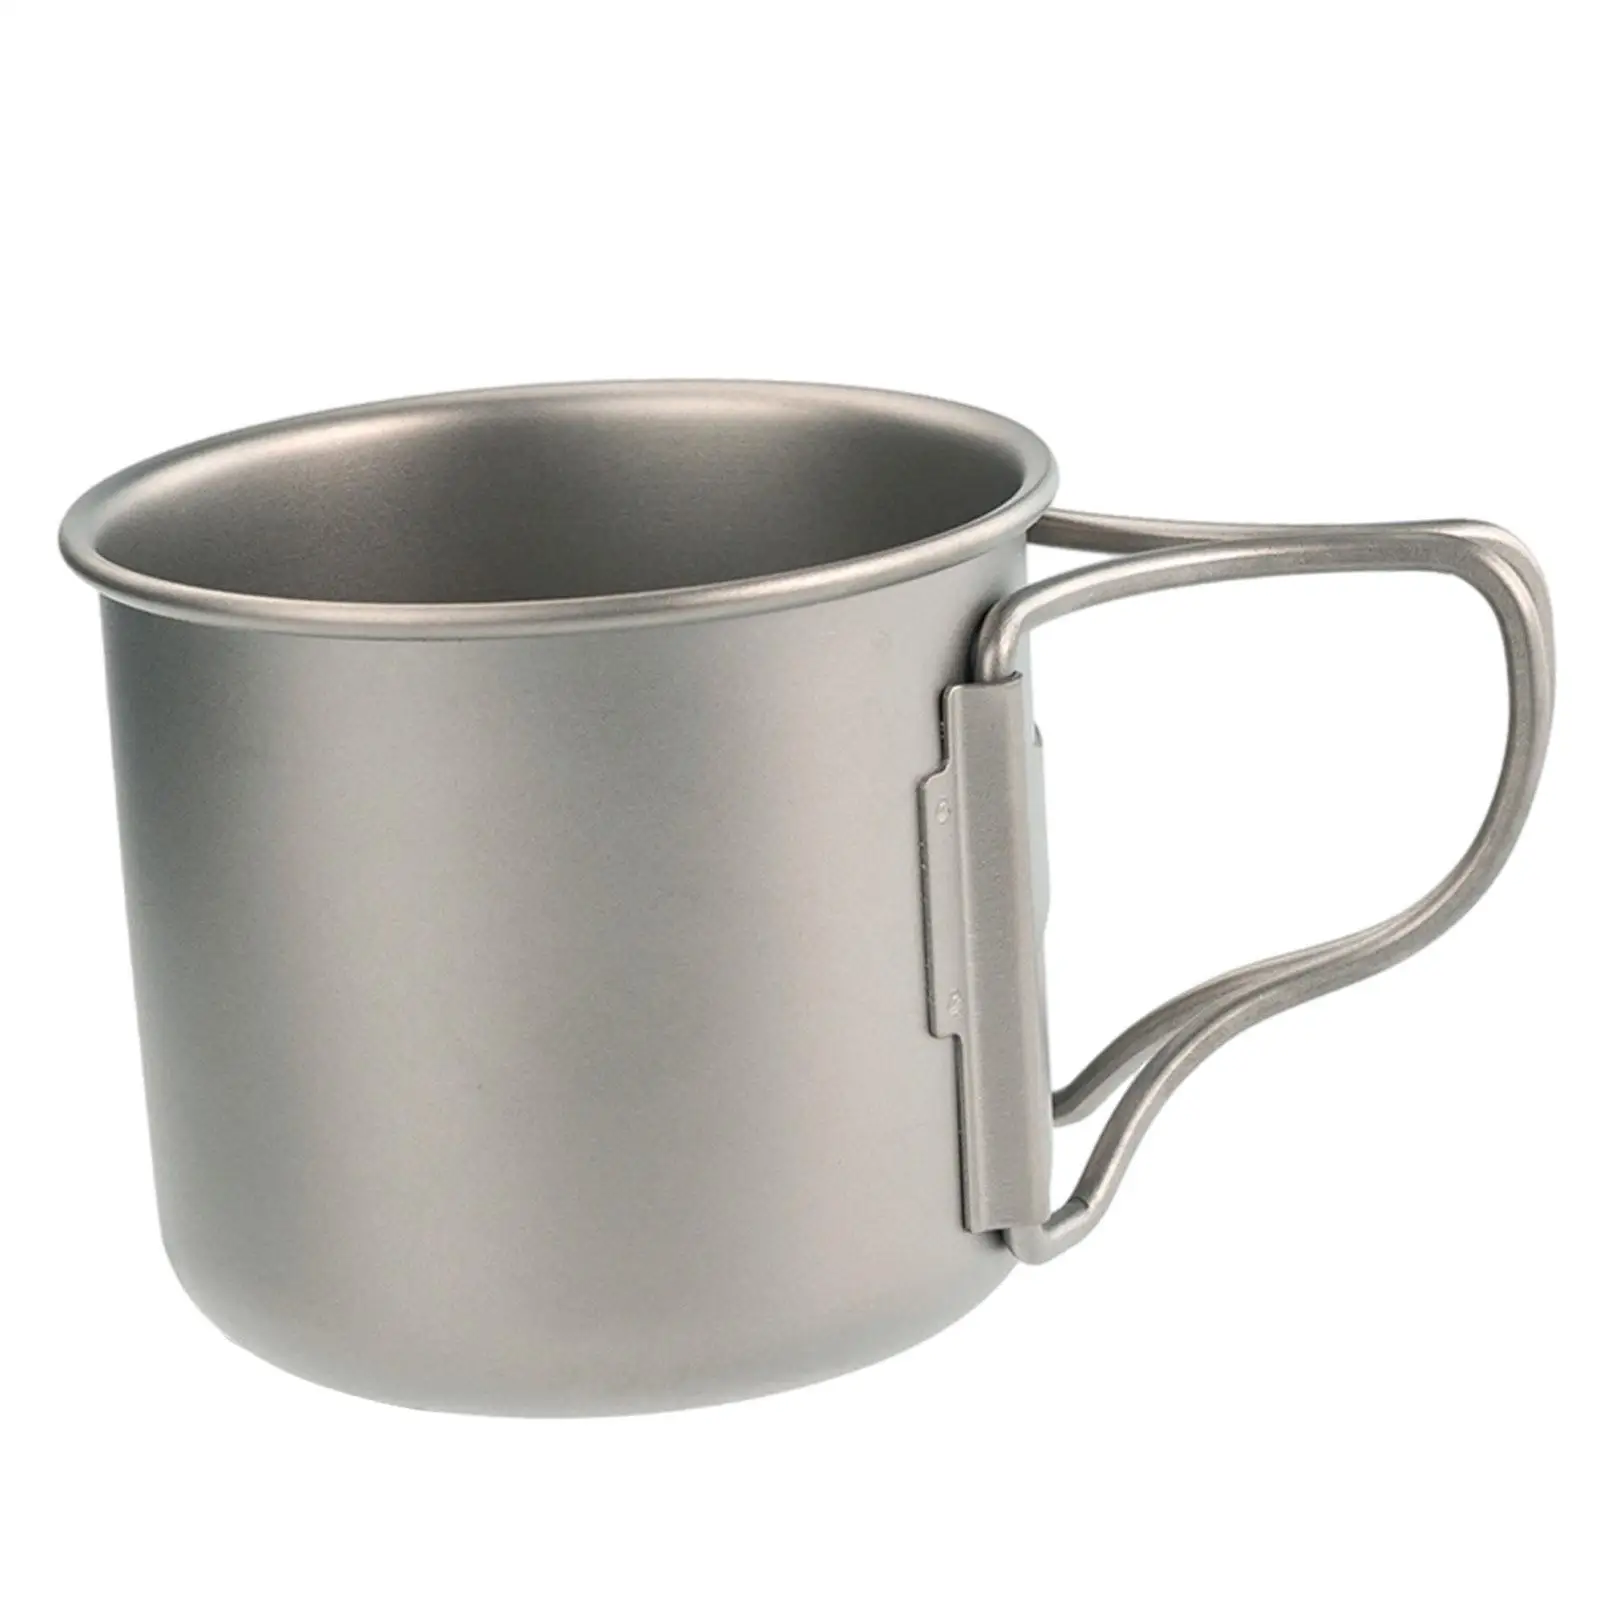 Outdoor Mug with Folding Handle 200ml Capacity Drinkware Camping Cups Titanium Cup for Home Office BBQ Campsite Hiking Kitchen